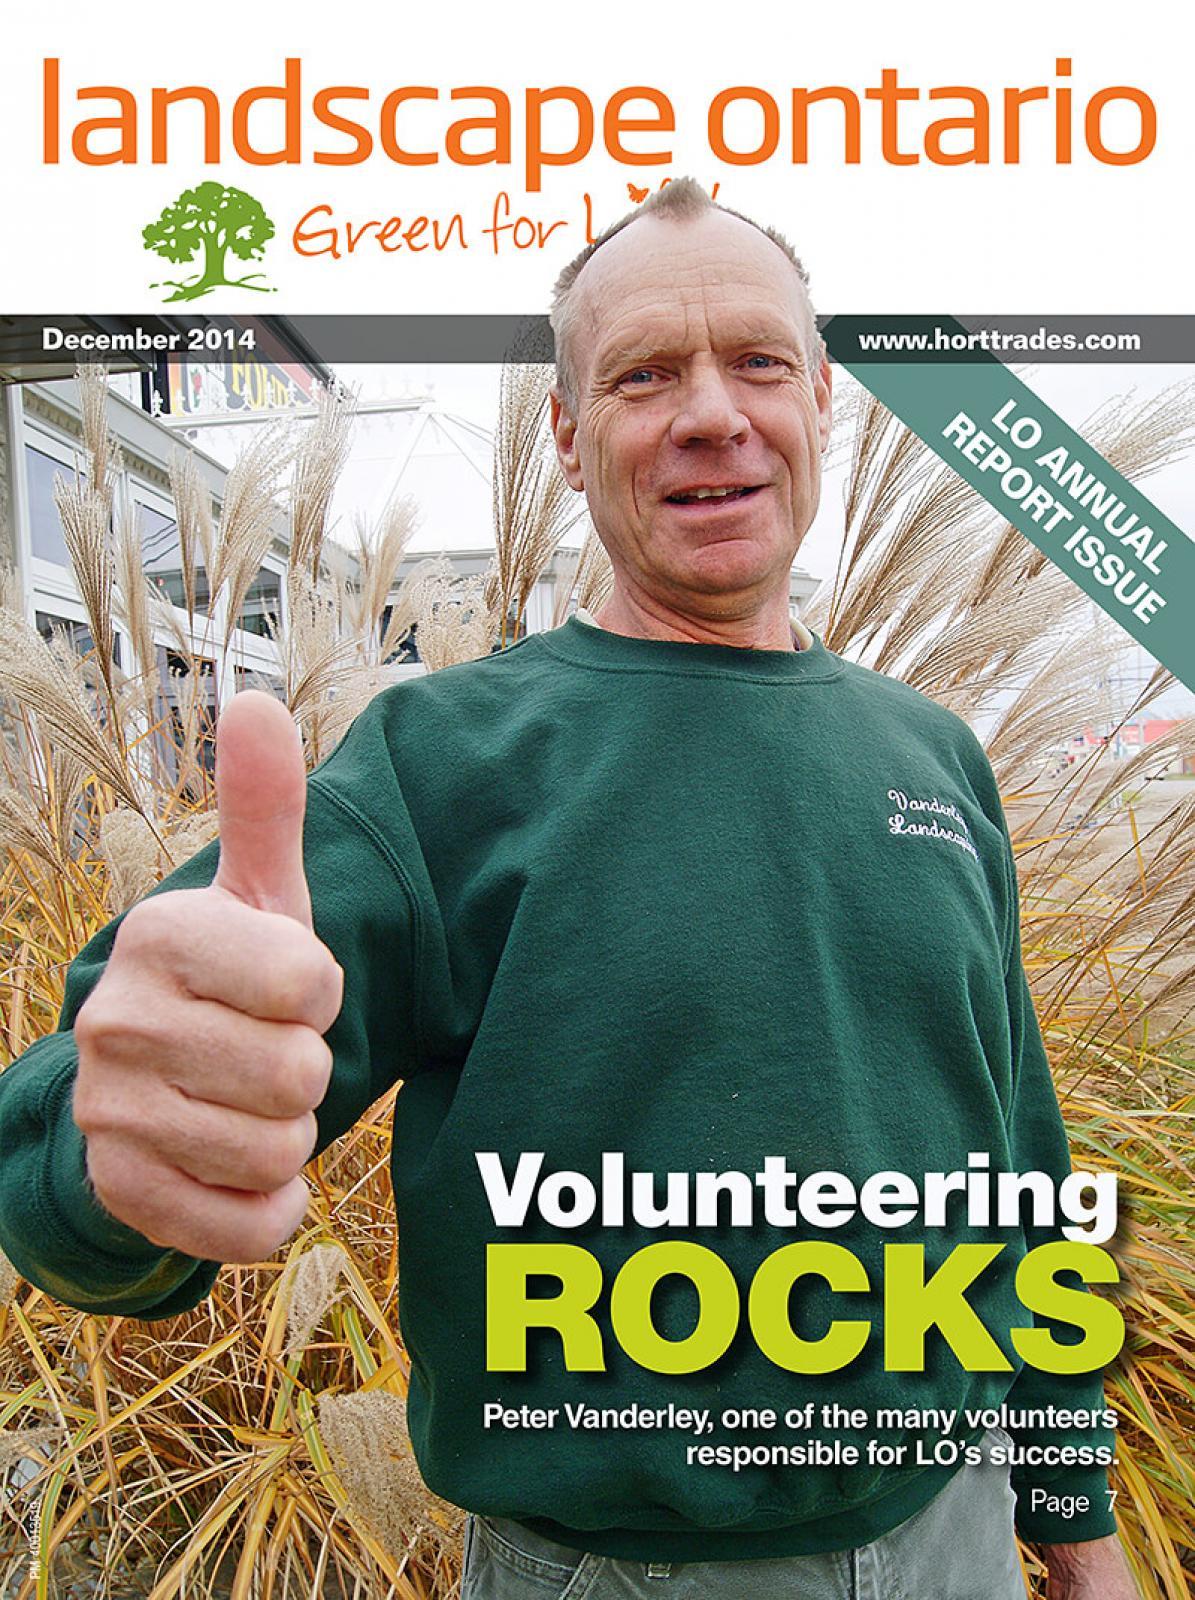 Volunteer Peter Vanderley is gives the thumbs up on the cover of this issue.